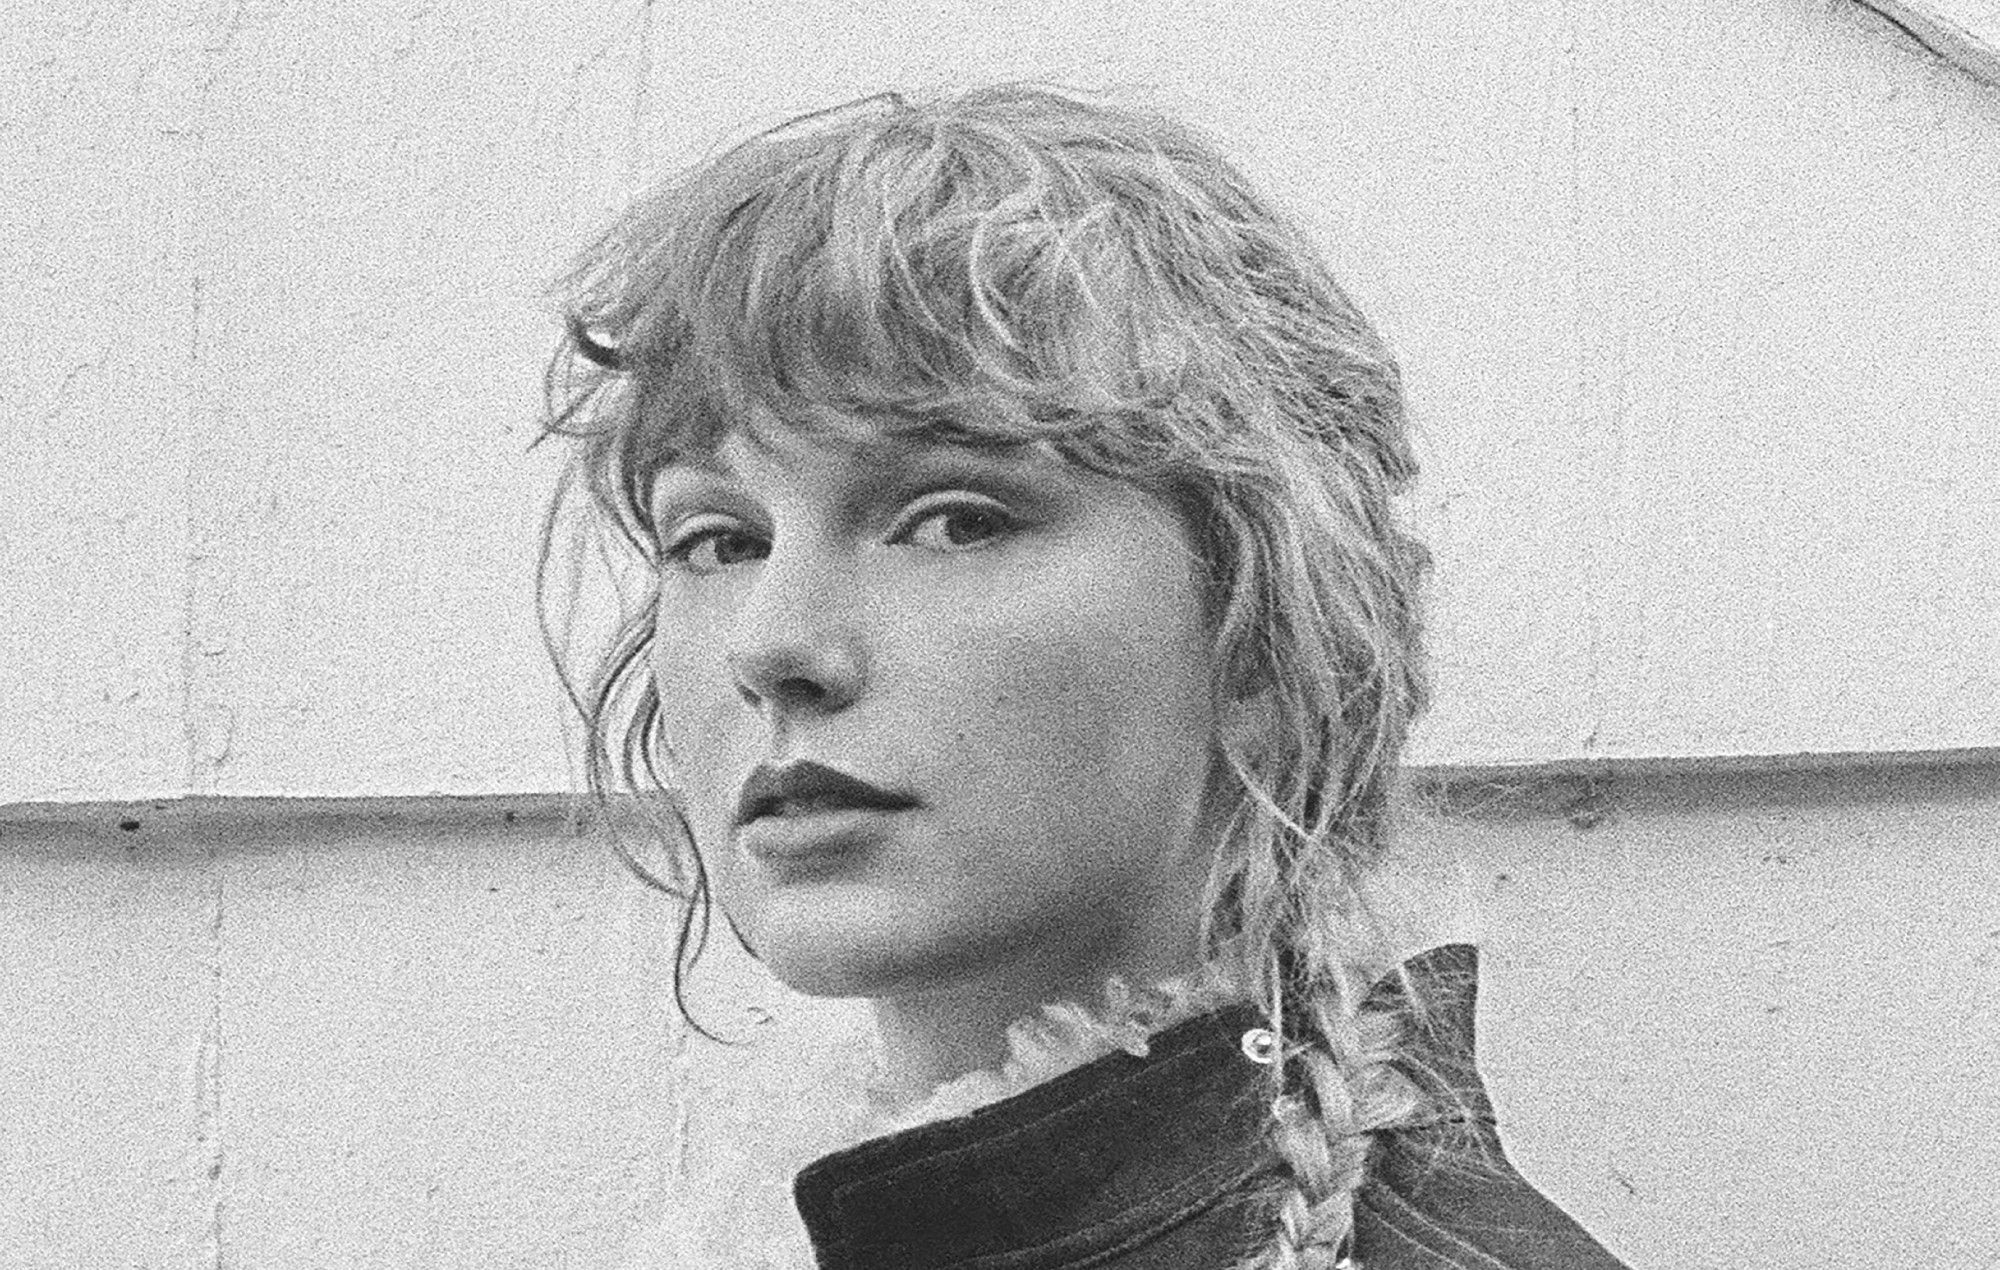 Read Taylor Swift's essay on her ninth album, 'Evermore': I have no idea what comes next